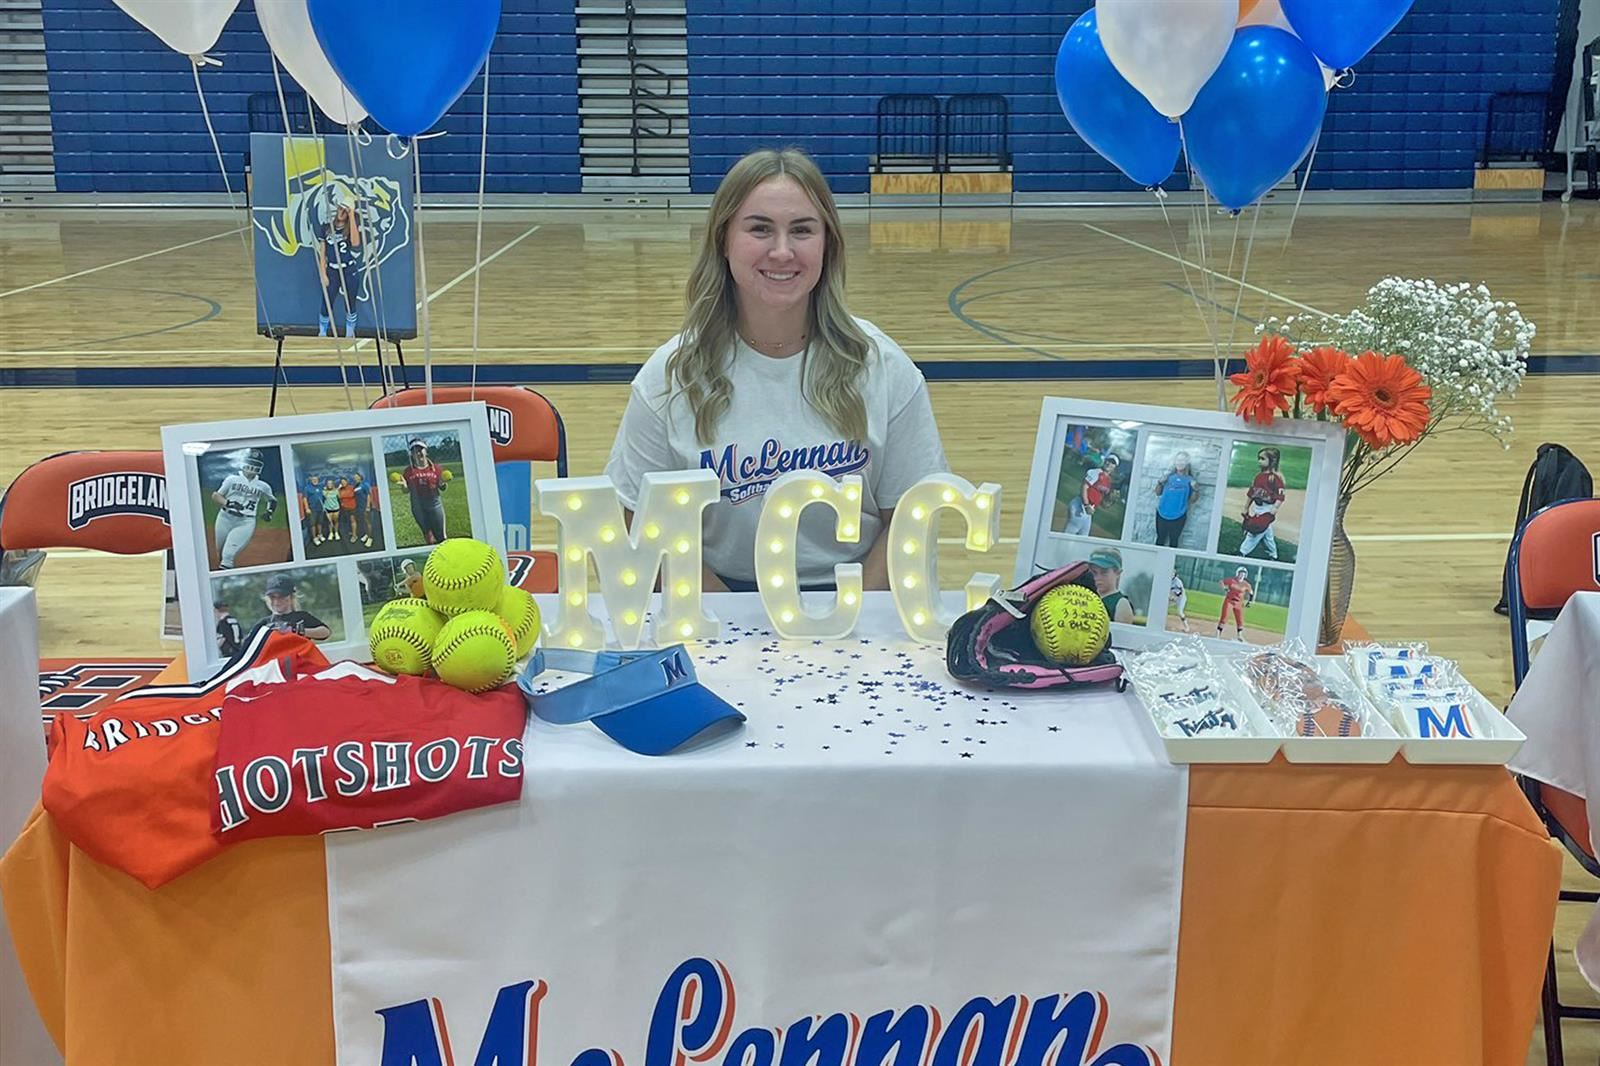 Bridgeland High School senior Trinity Allen signed a letter of intent to play softball at McLennan Community College.